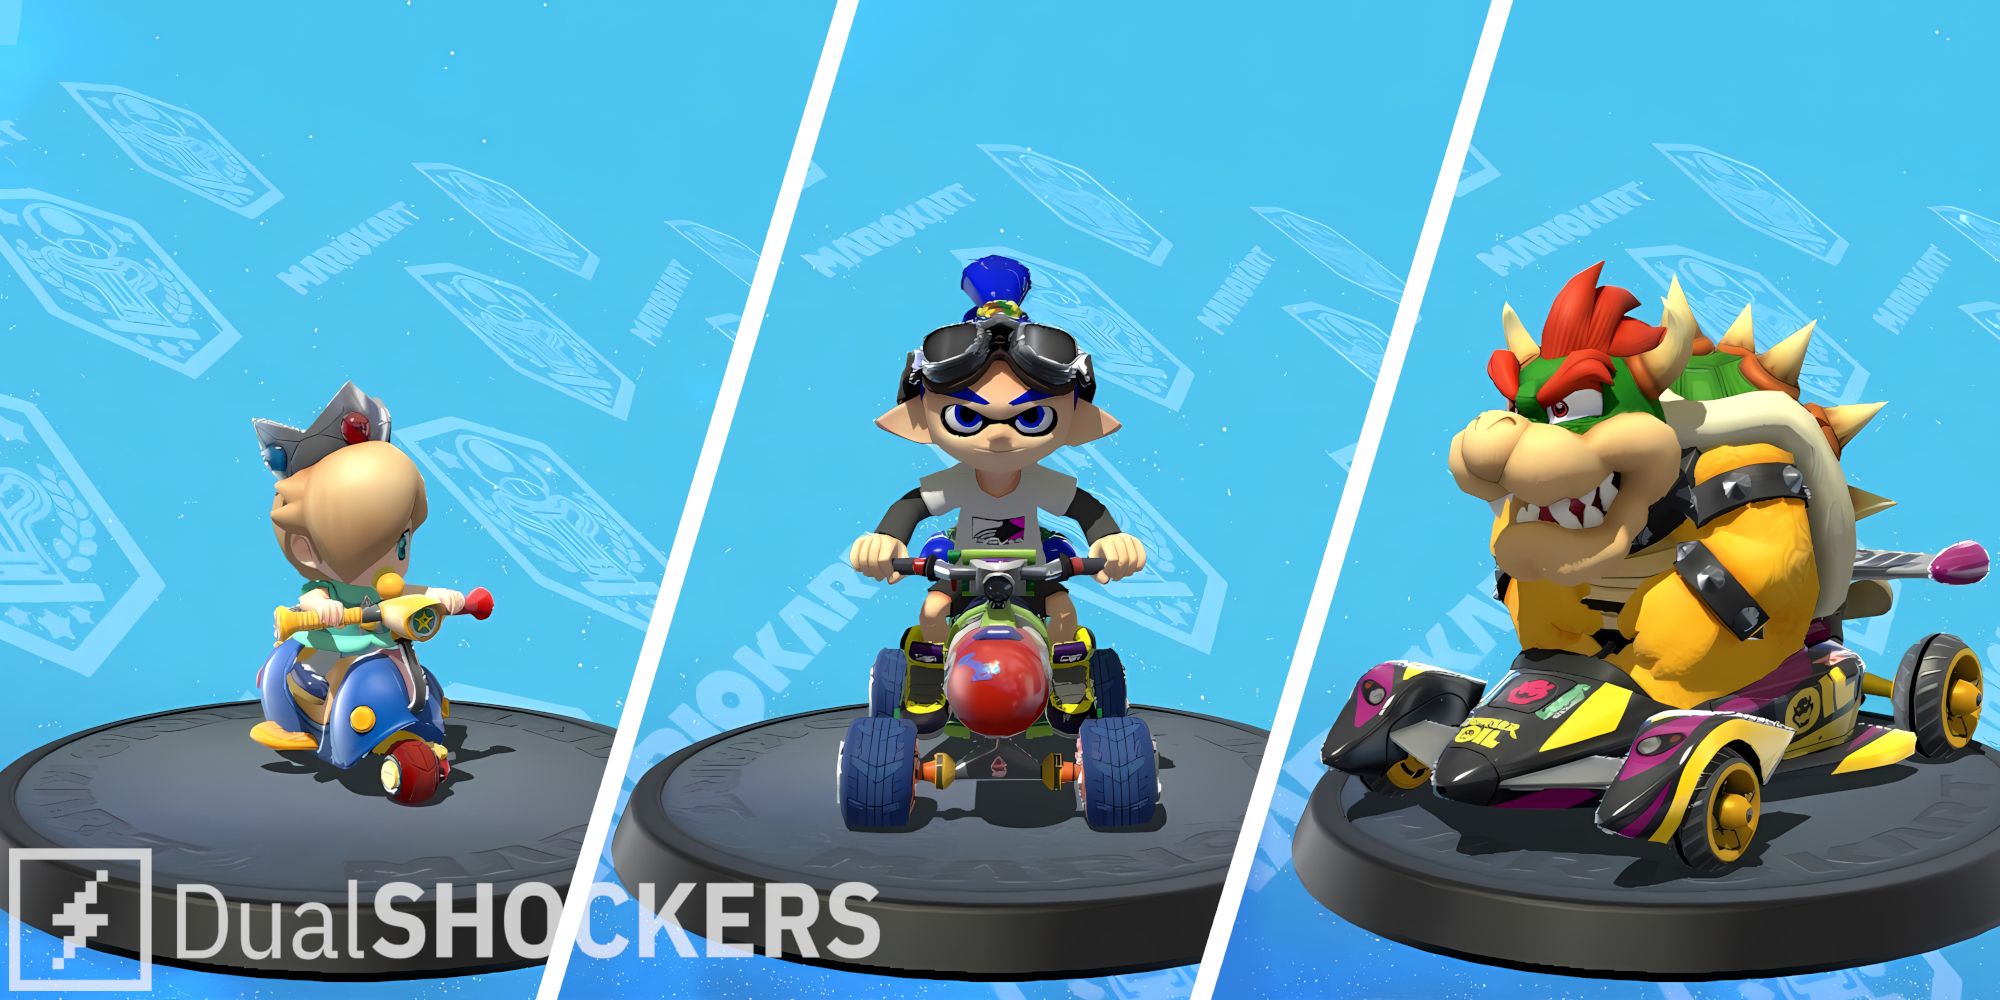 Mario Kart 8 Deluxe Baby Rosalina, Inkling Boy, and Bowser in the Character Select Menu